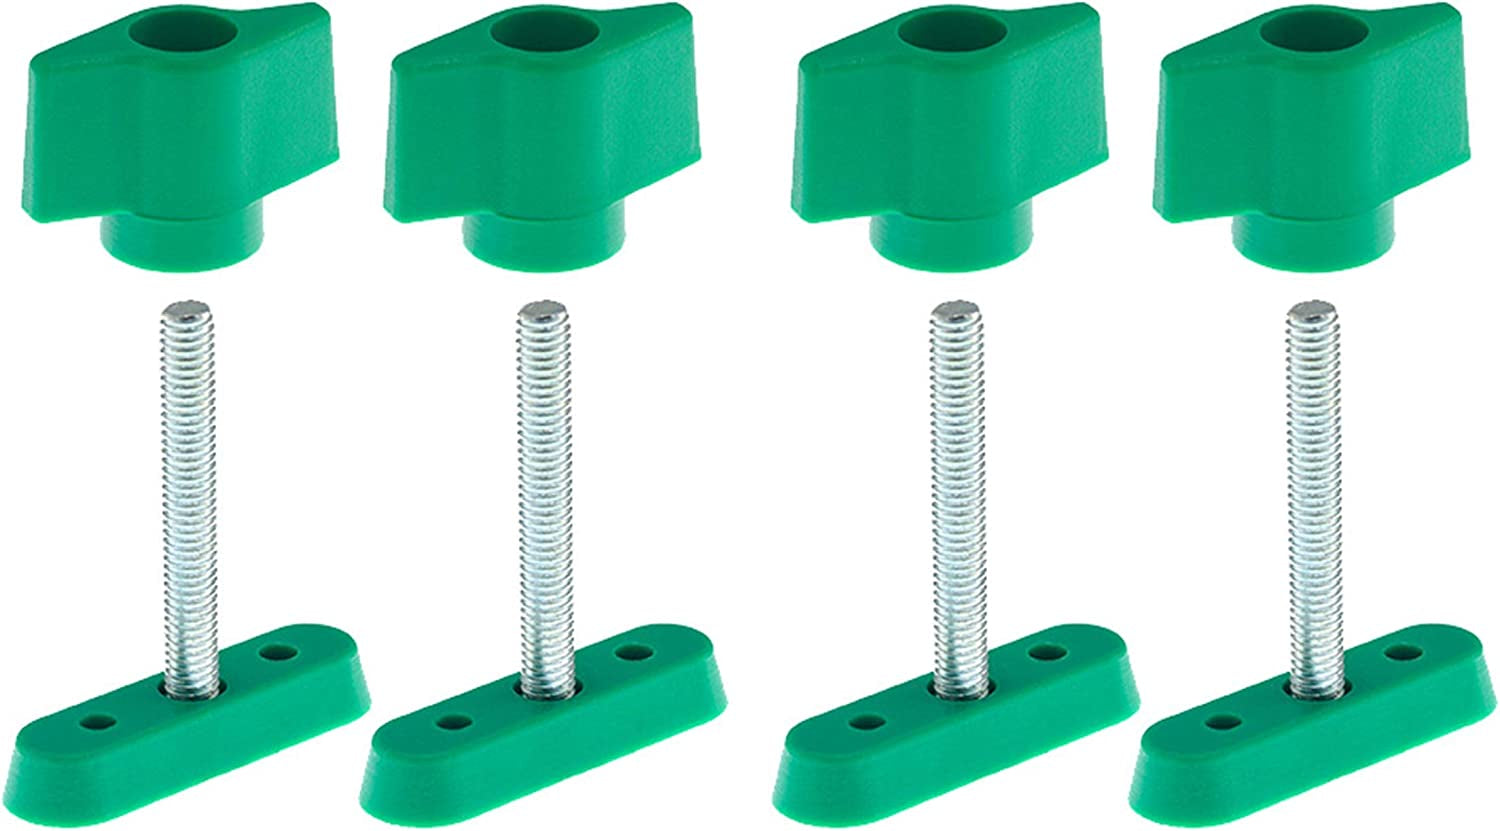 Micro Jig, Micro Jig Matchfit Dovetail Clamp Hardware 38 Mm Long